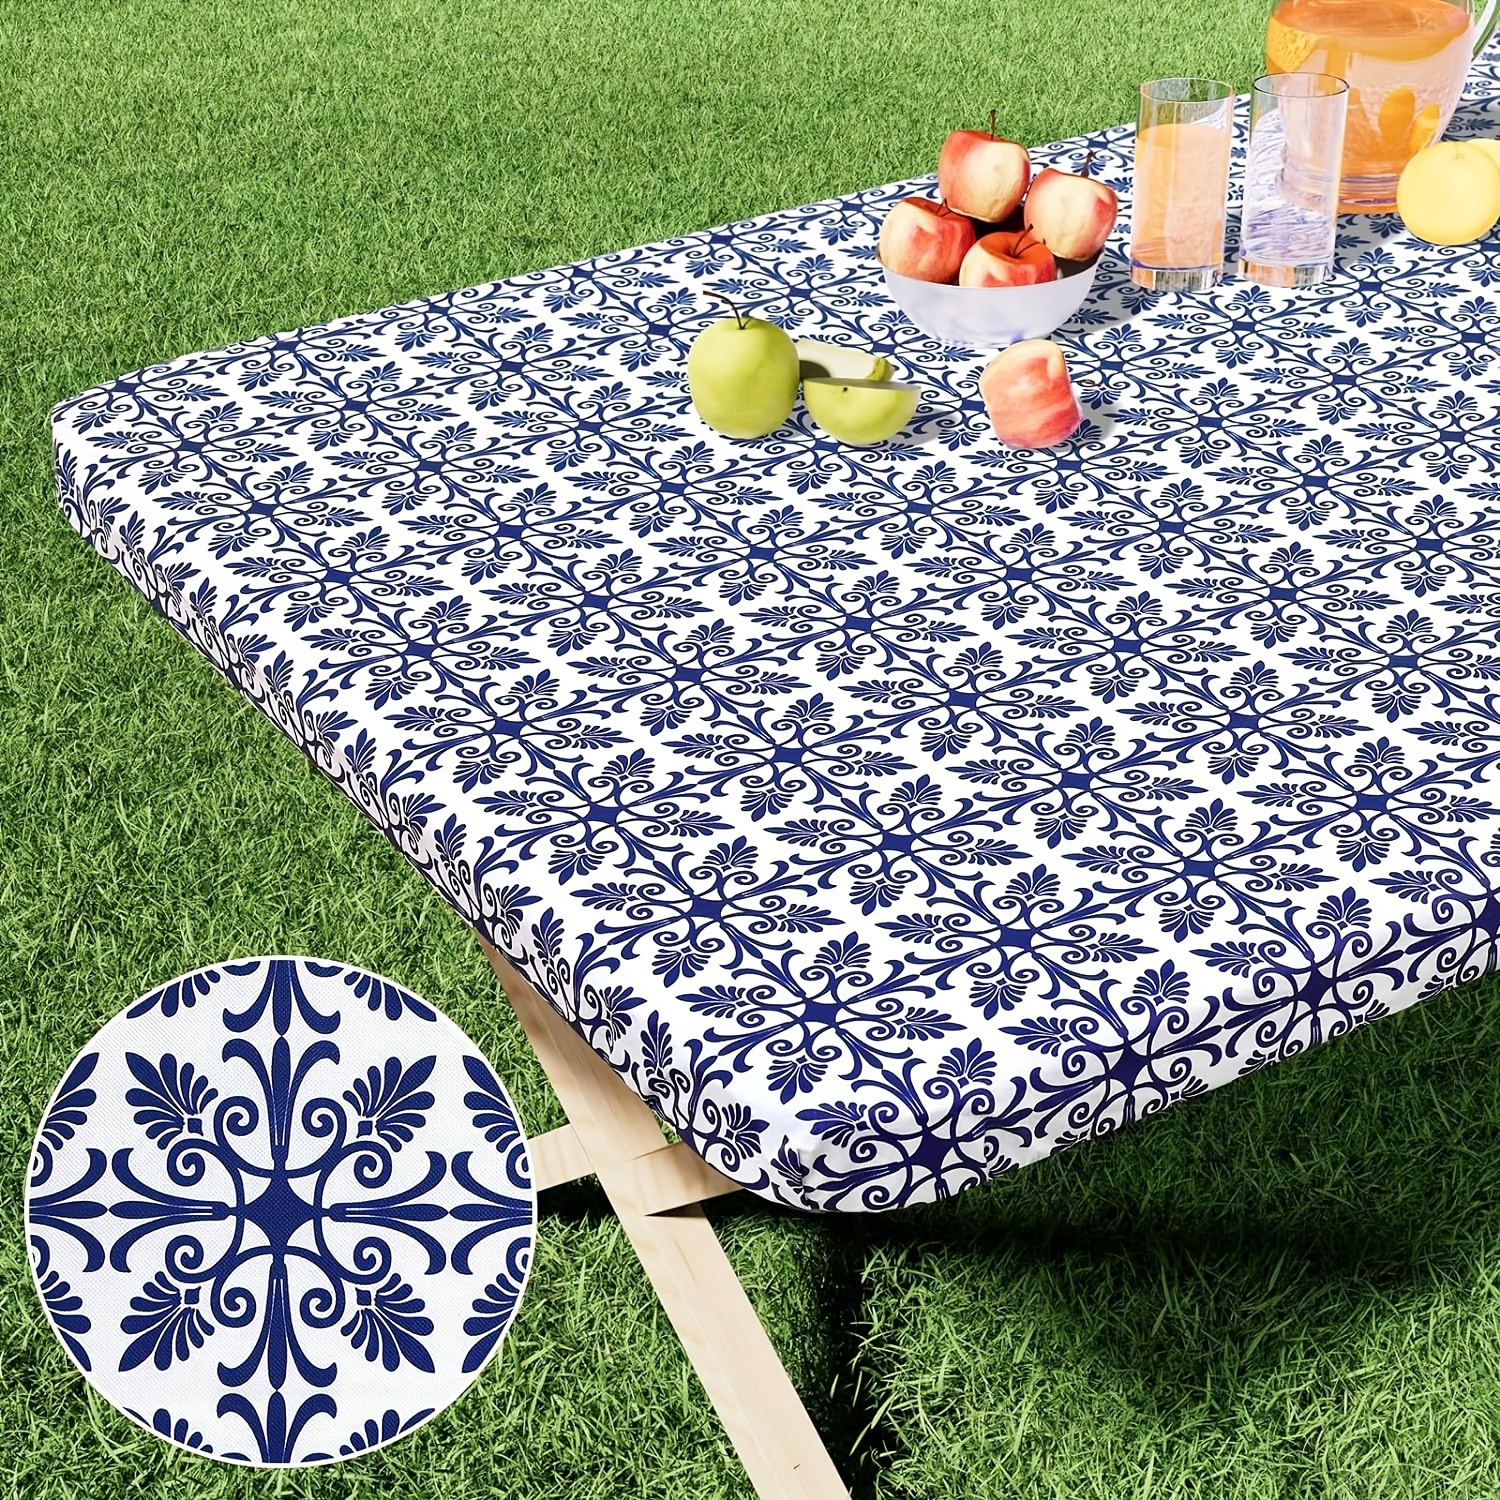 

1pc Waterproof & Dustproof Vinyl Table Cover - Easy Clean, Wipeable Flannel Outdoor Table Protector For Patio, Yard, Picnic, Bbq | Elastic Fit